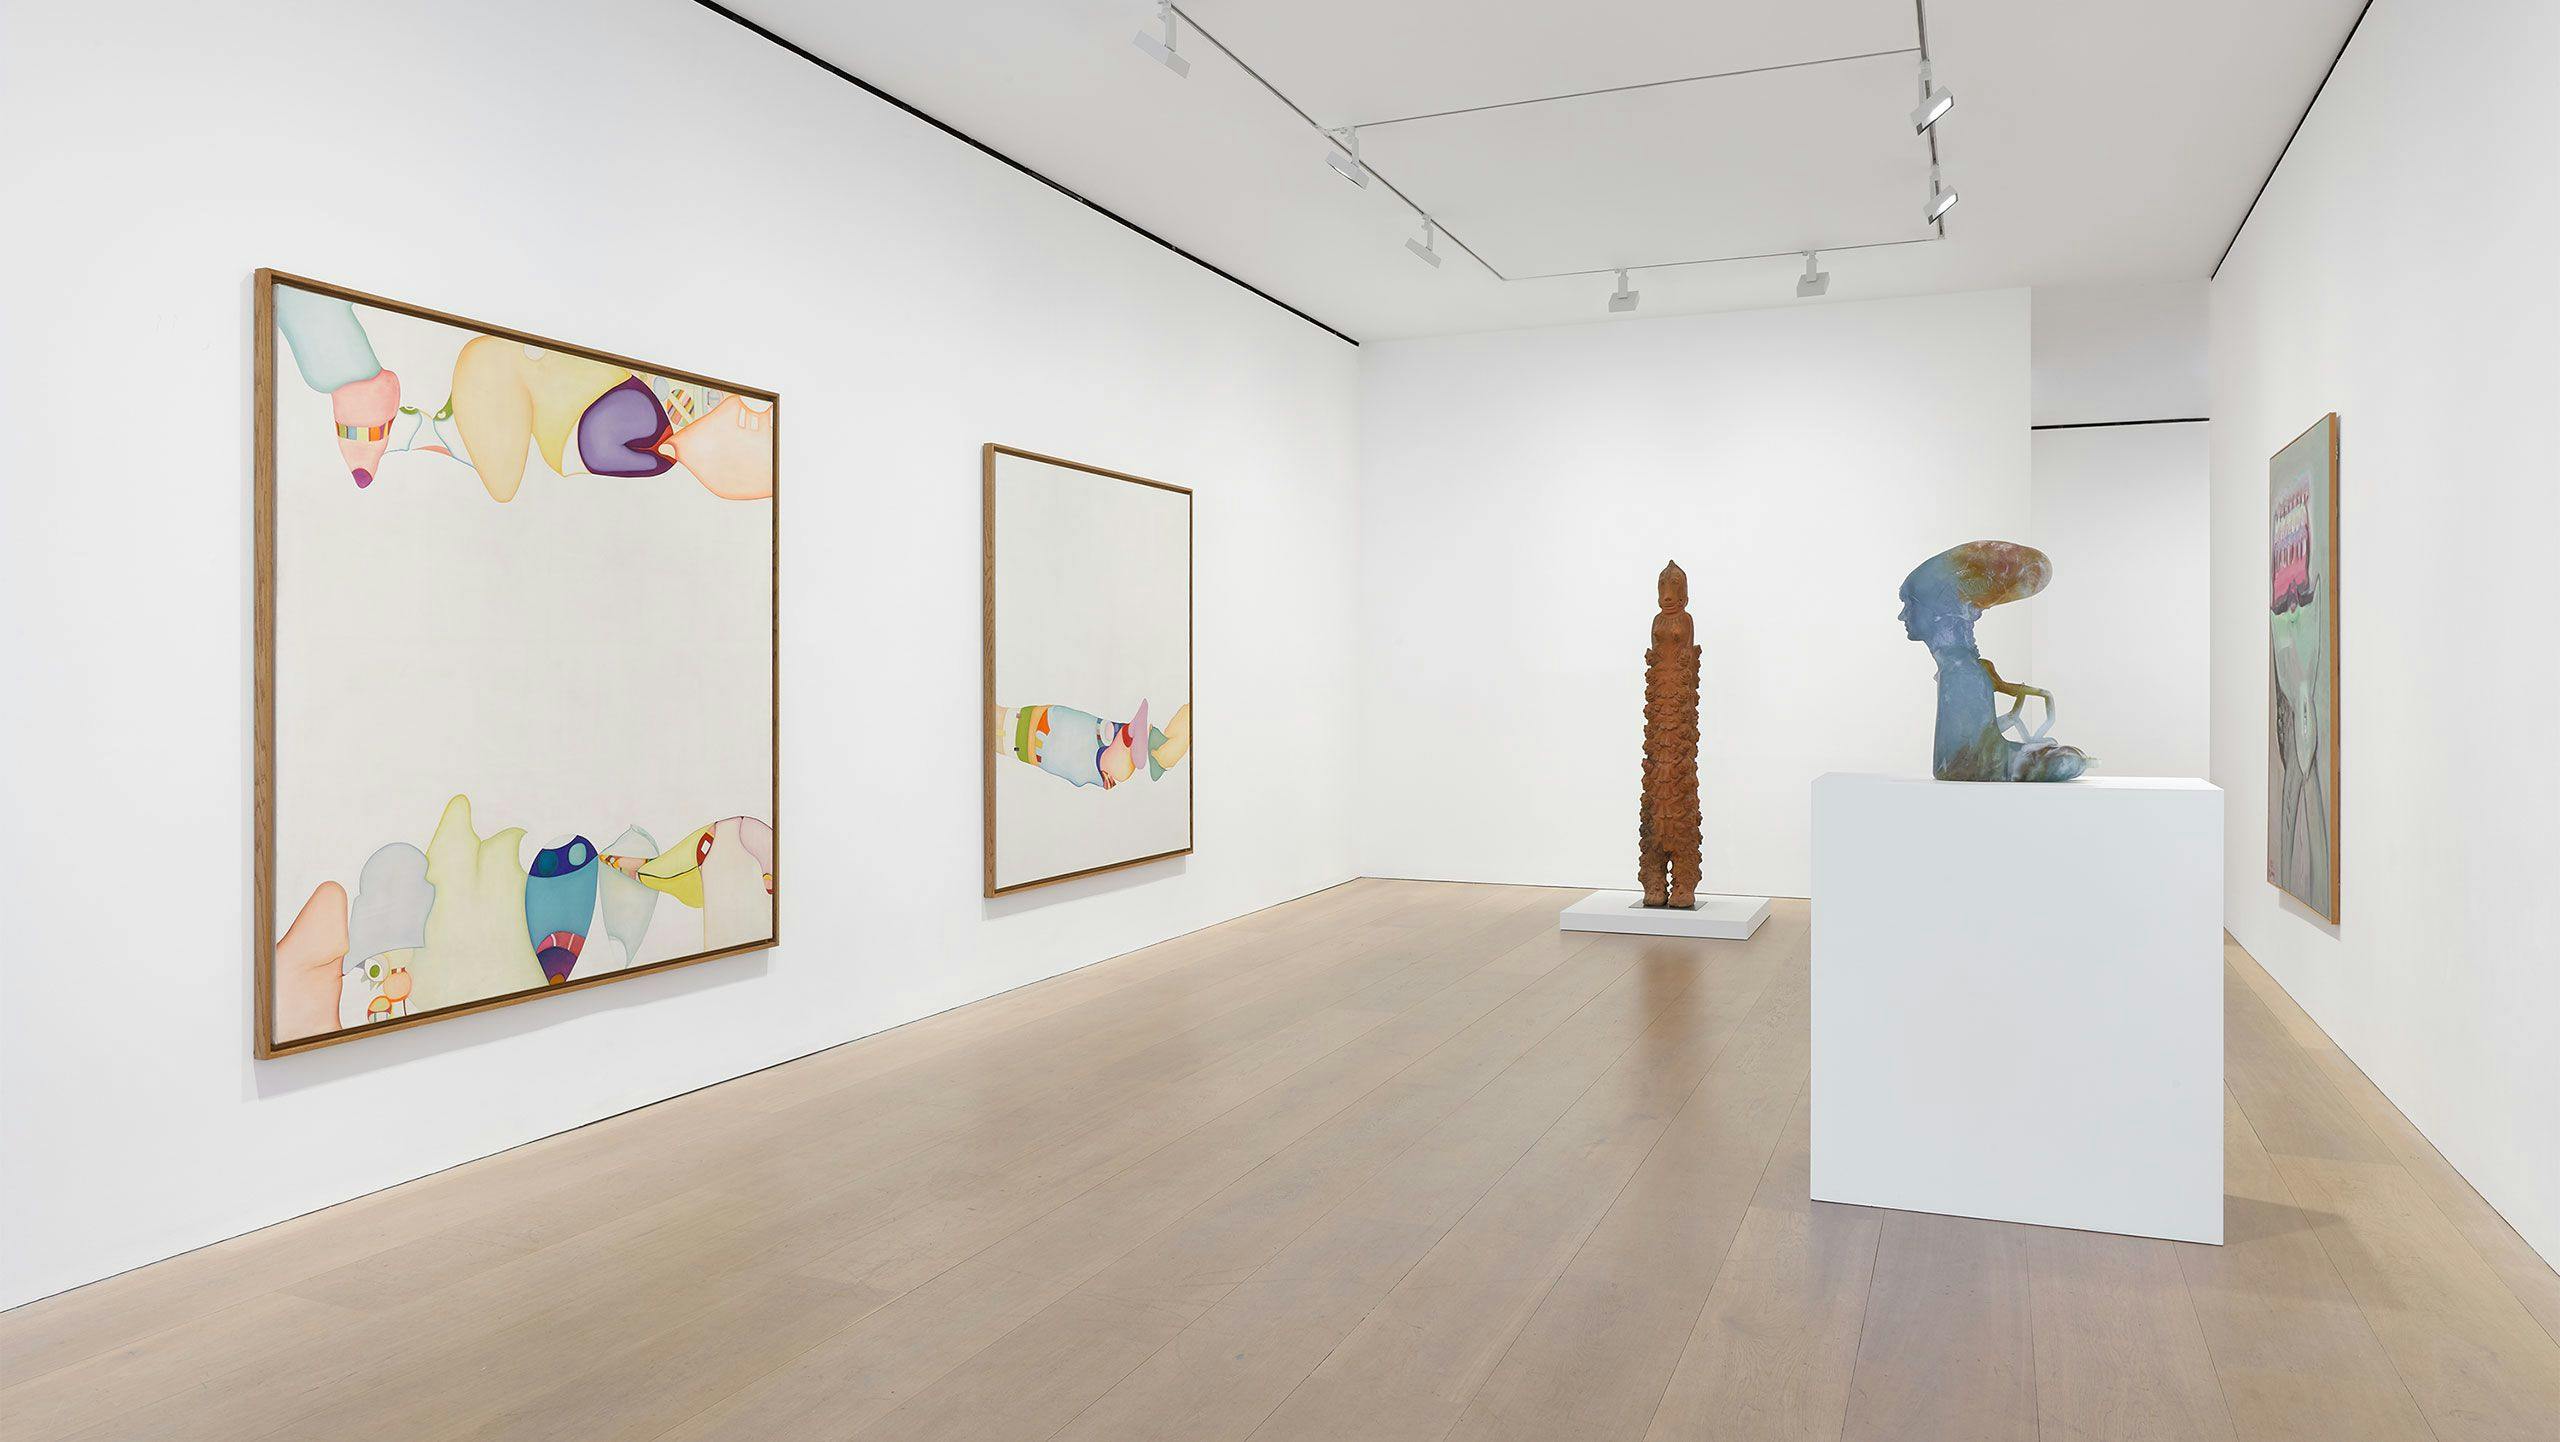 Installation view of Vessels at David Zwirner, London dated 2022